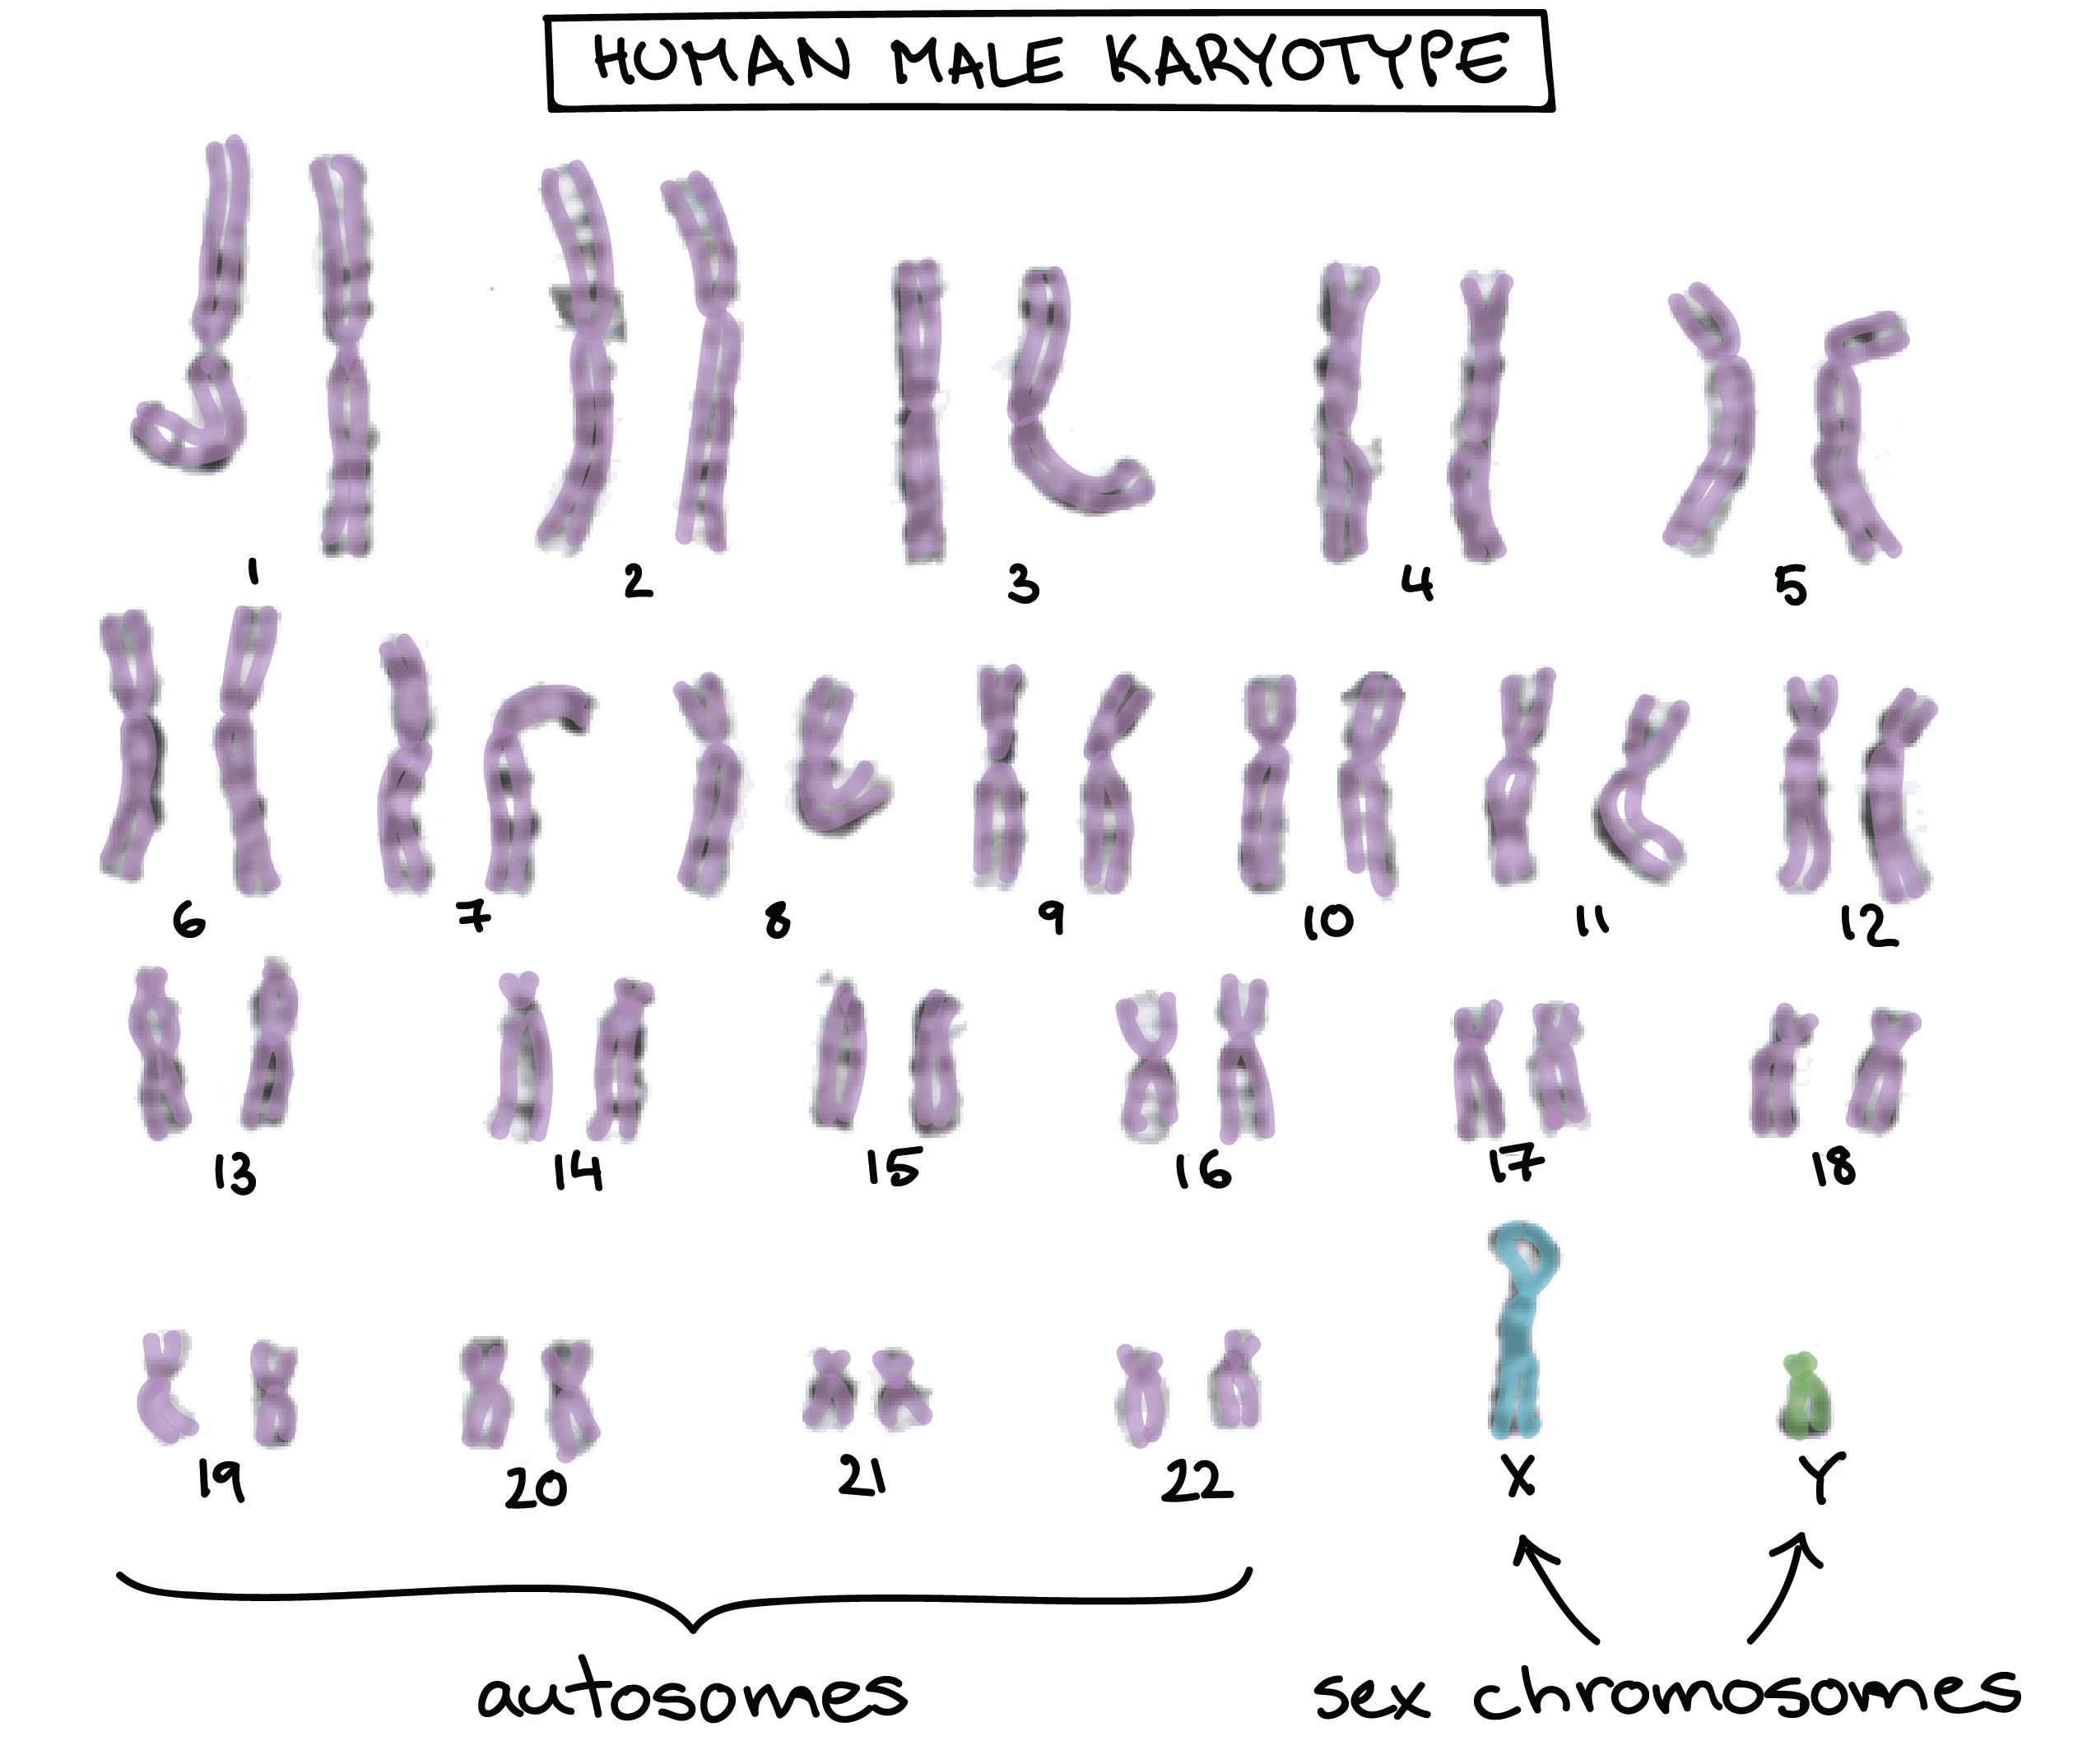 Image of a human karyotype, showing the 44 autosomes in matching pairs and 2 dissimilar sex chromosomes (X and Y)